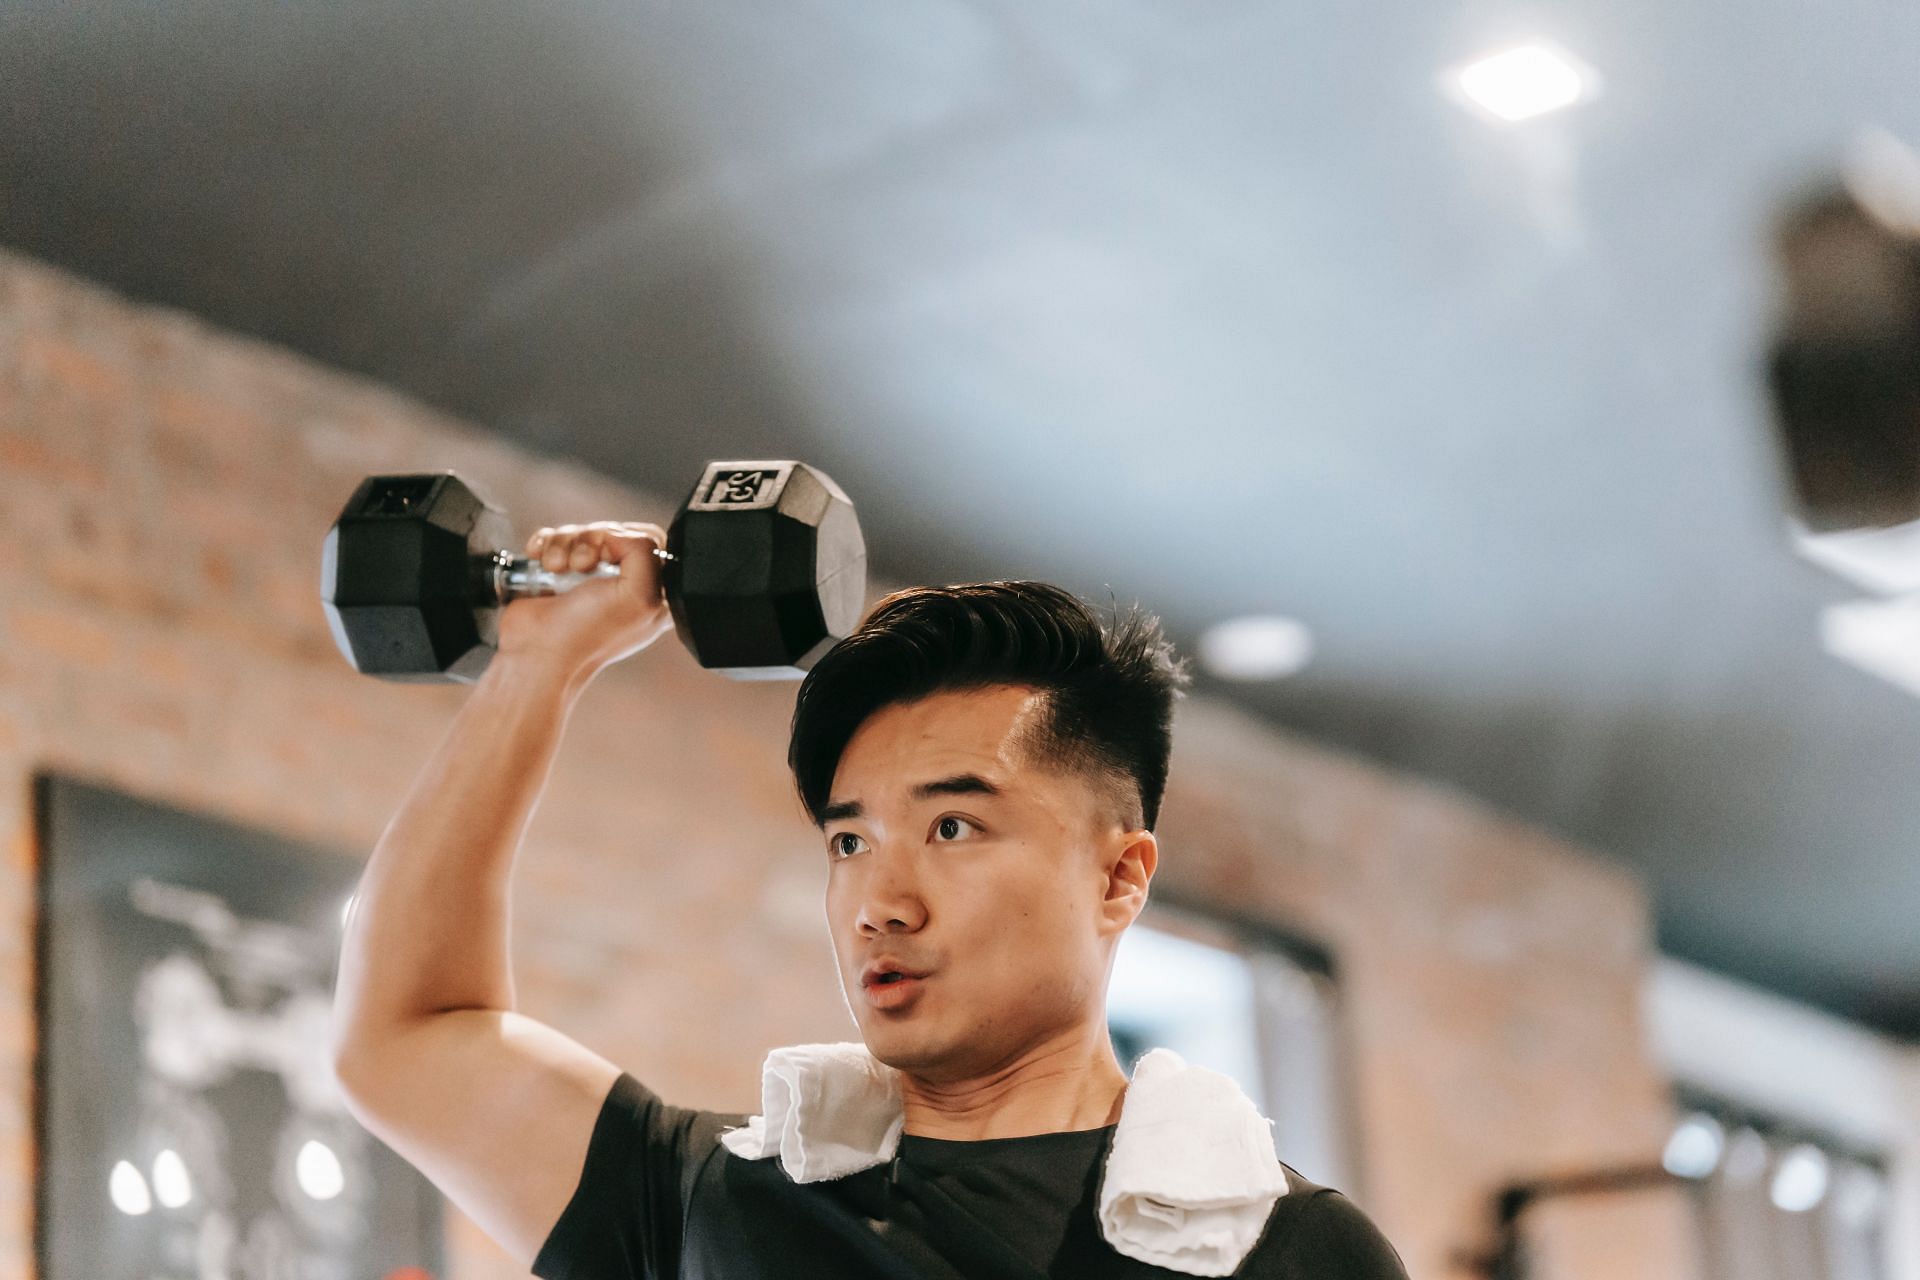 Overhead press will work out your shoulder and upper back muscles (Image via Pexels @Andres Ayrton)